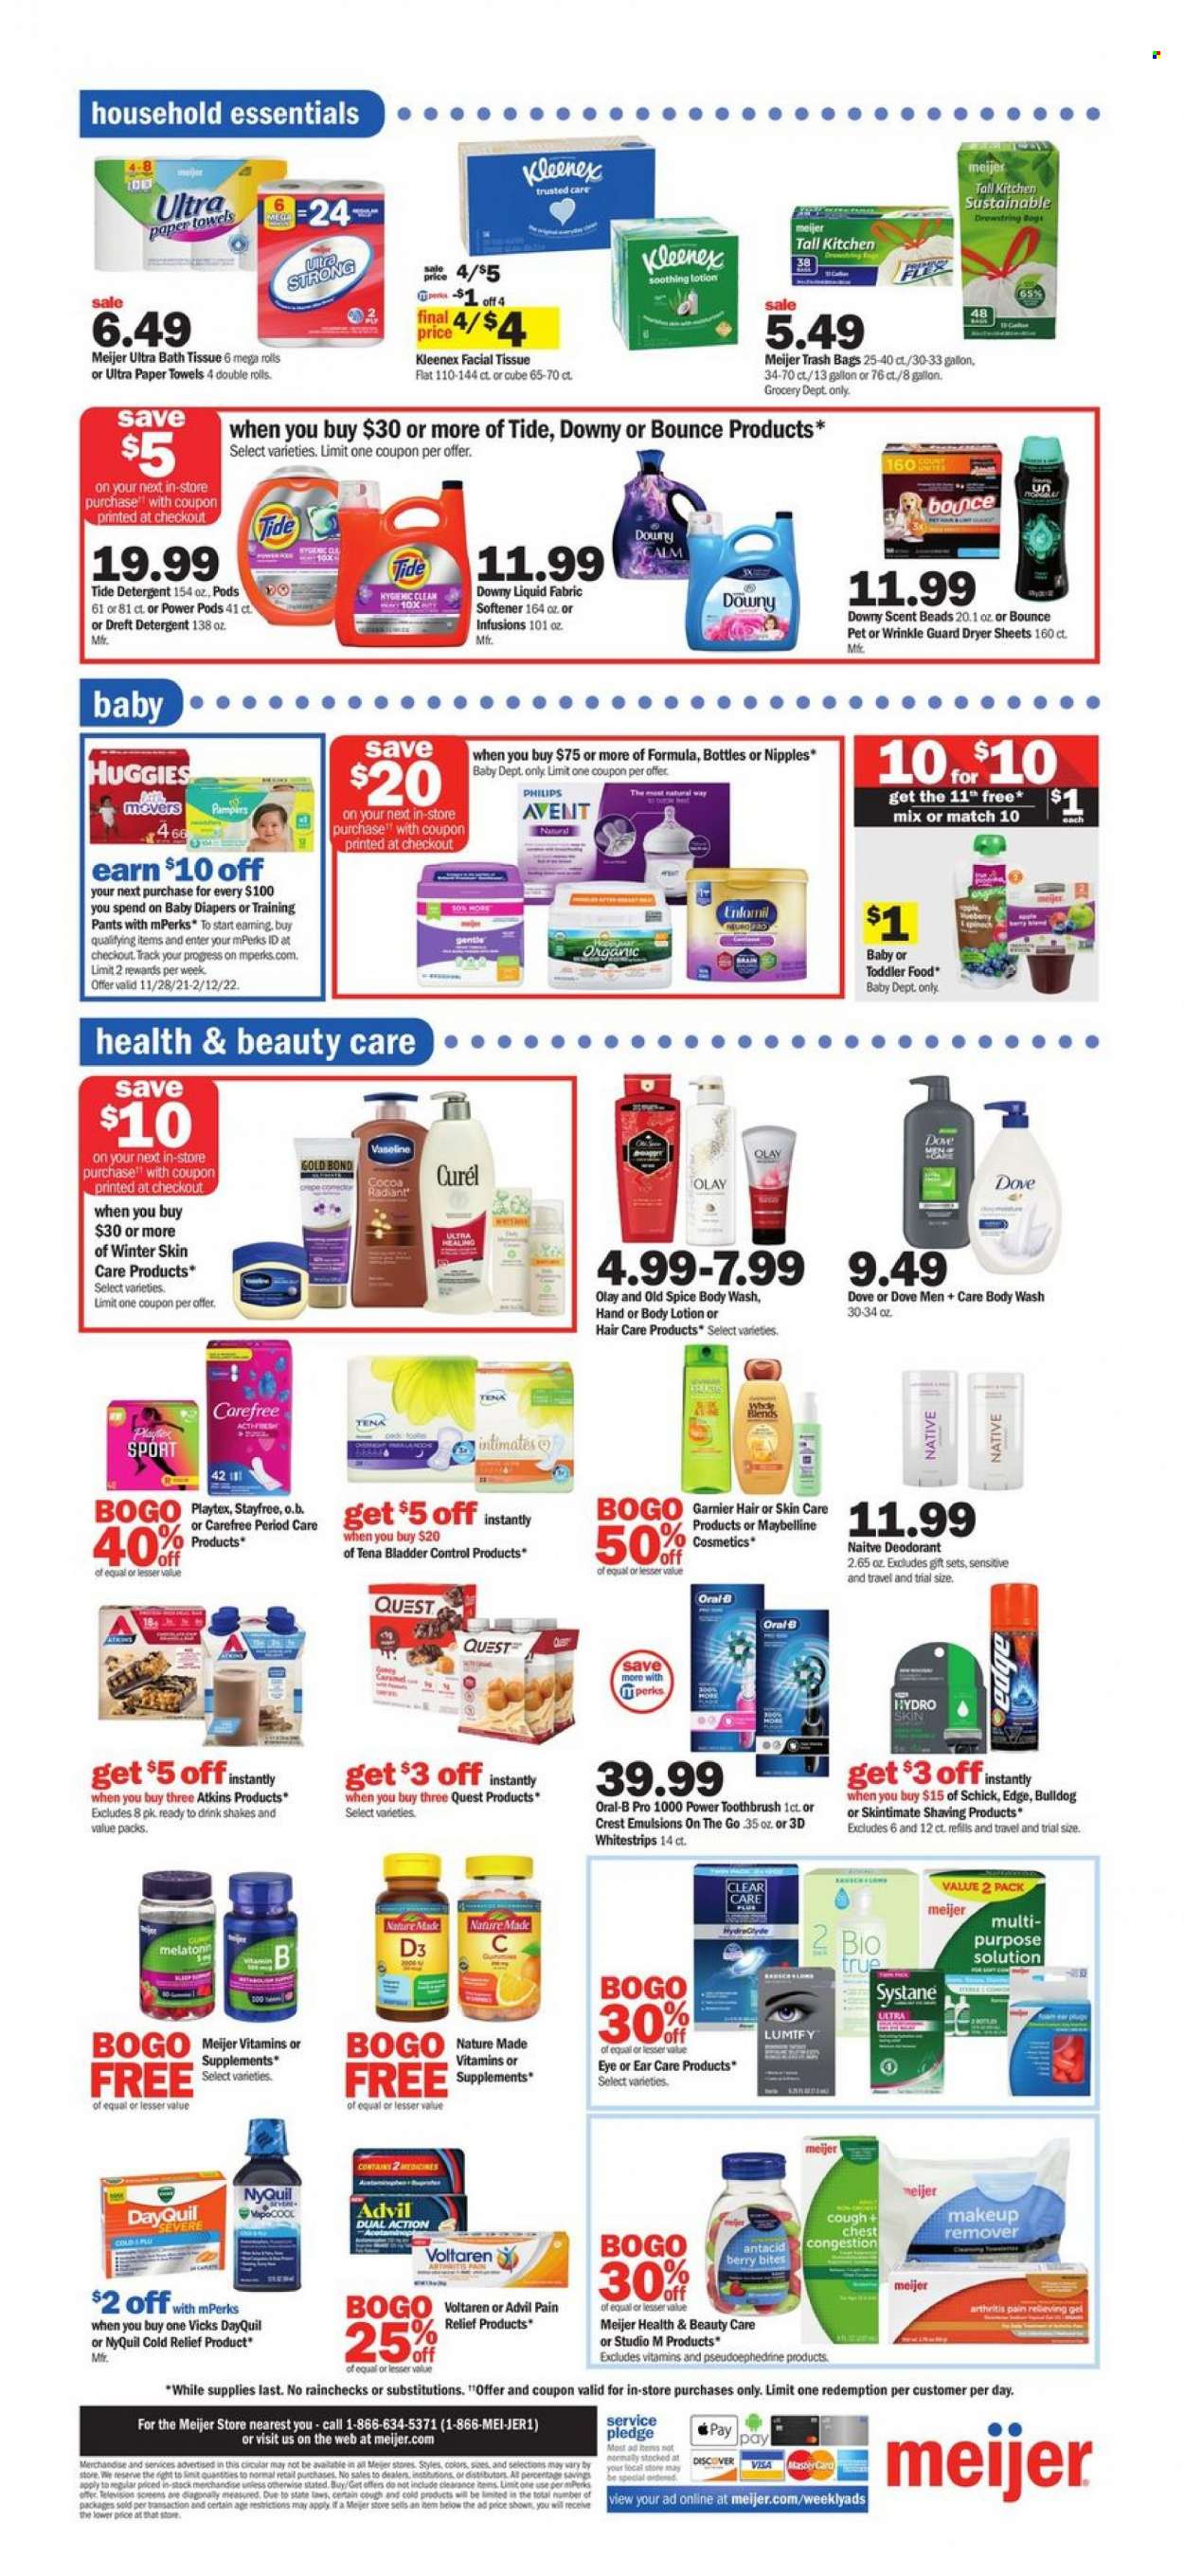 thumbnail - Meijer Flyer - 01/09/2022 - 01/15/2022 - Sales products - shake, cocoa, spice, caramel, Huggies, Pampers, pants, nappies, baby pants, bath tissue, Kleenex, kitchen towels, paper towels, detergent, Pledge, Tide, fabric softener, Bounce, dryer sheets, Downy Laundry, body wash, Dove, Old Spice, Vaseline, toothbrush, Oral-B, Crest, Stayfree, Playtex, Carefree, Olay, Curél, body lotion, Maybelline, anti-perspirant, deodorant, Schick, Vicks, bag, trash bags, Philips, Clear Care, DayQuil, Melatonin, Nature Made, Systane, pain relief, NyQuil, Advil Rapid, Antacid, vitamin D3, makeup. Page 13.